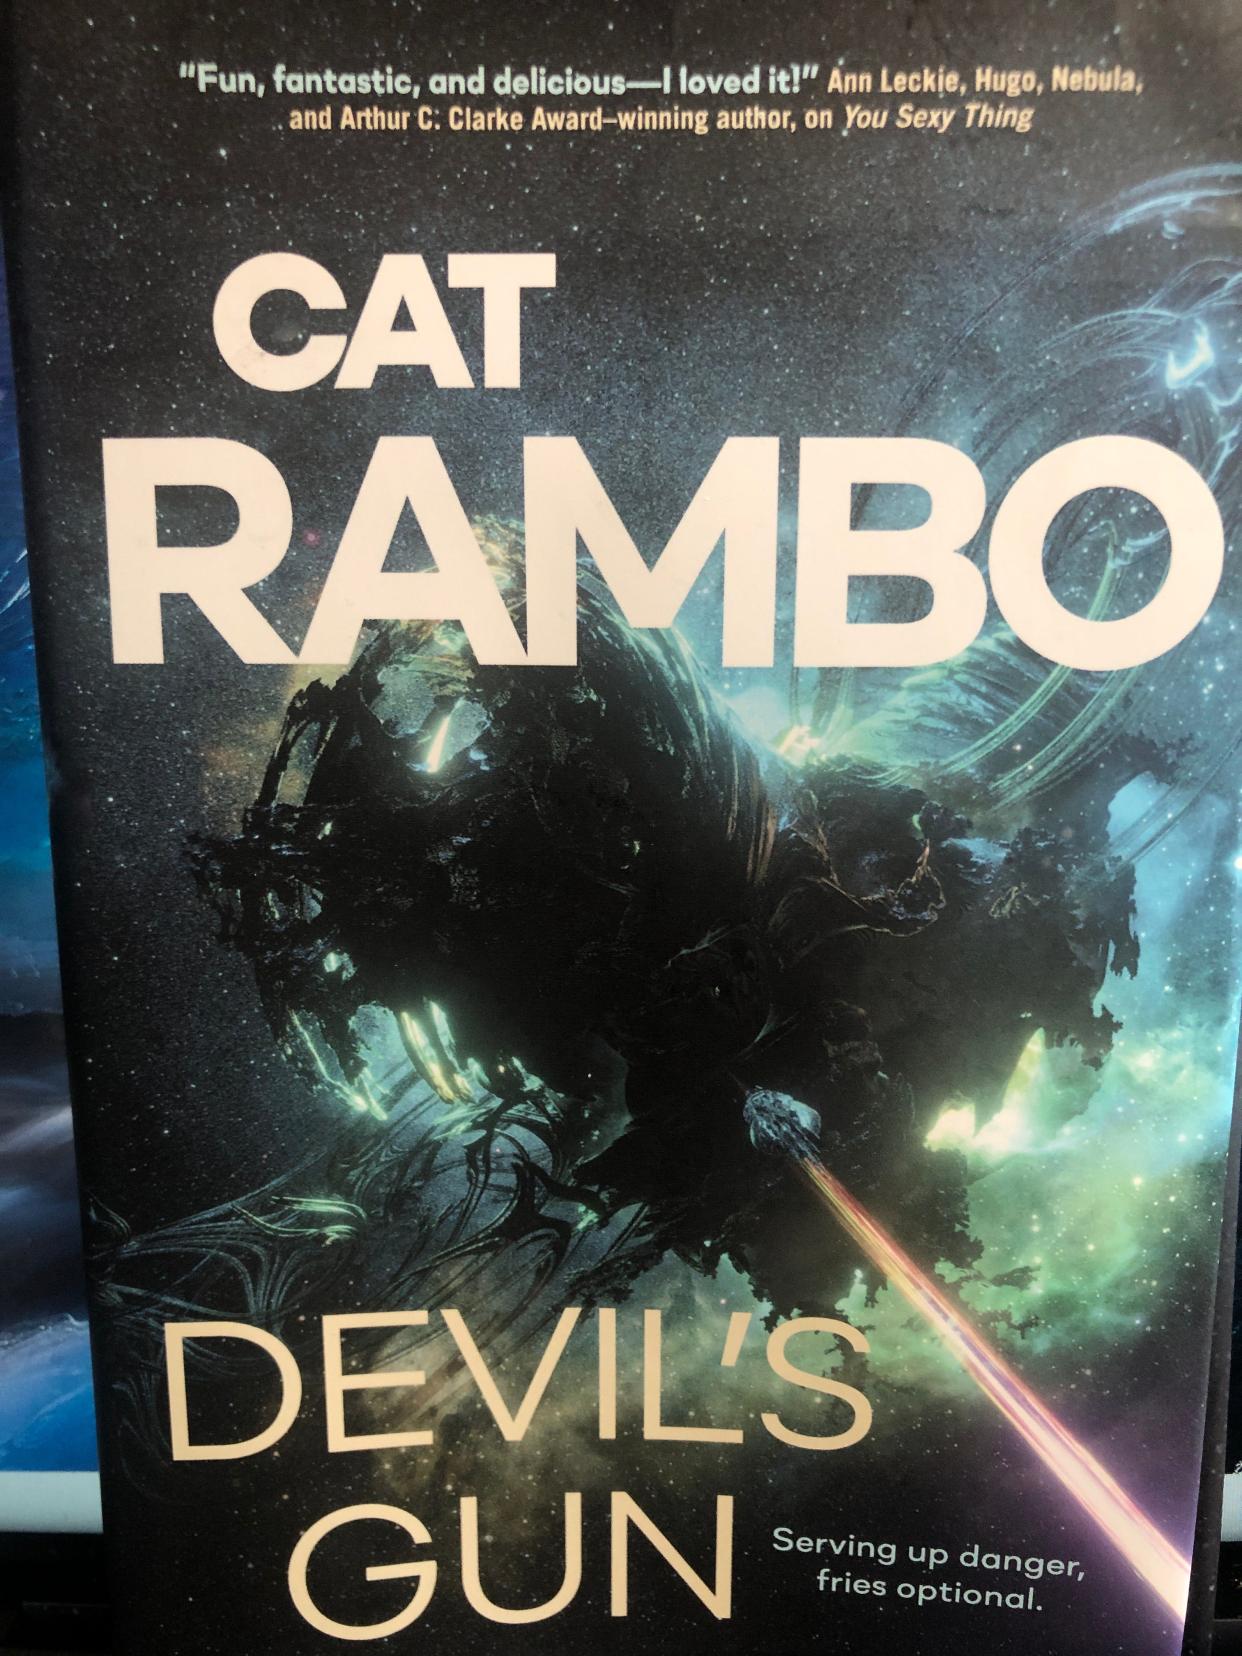 "Devil's Gun" is the latest novel by South Bend native and award-winning science fiction and fantasy writer Cat Rambo, moved back to South Bend in 2022. The book is a sequel to 2021's "You Sexy Thing."